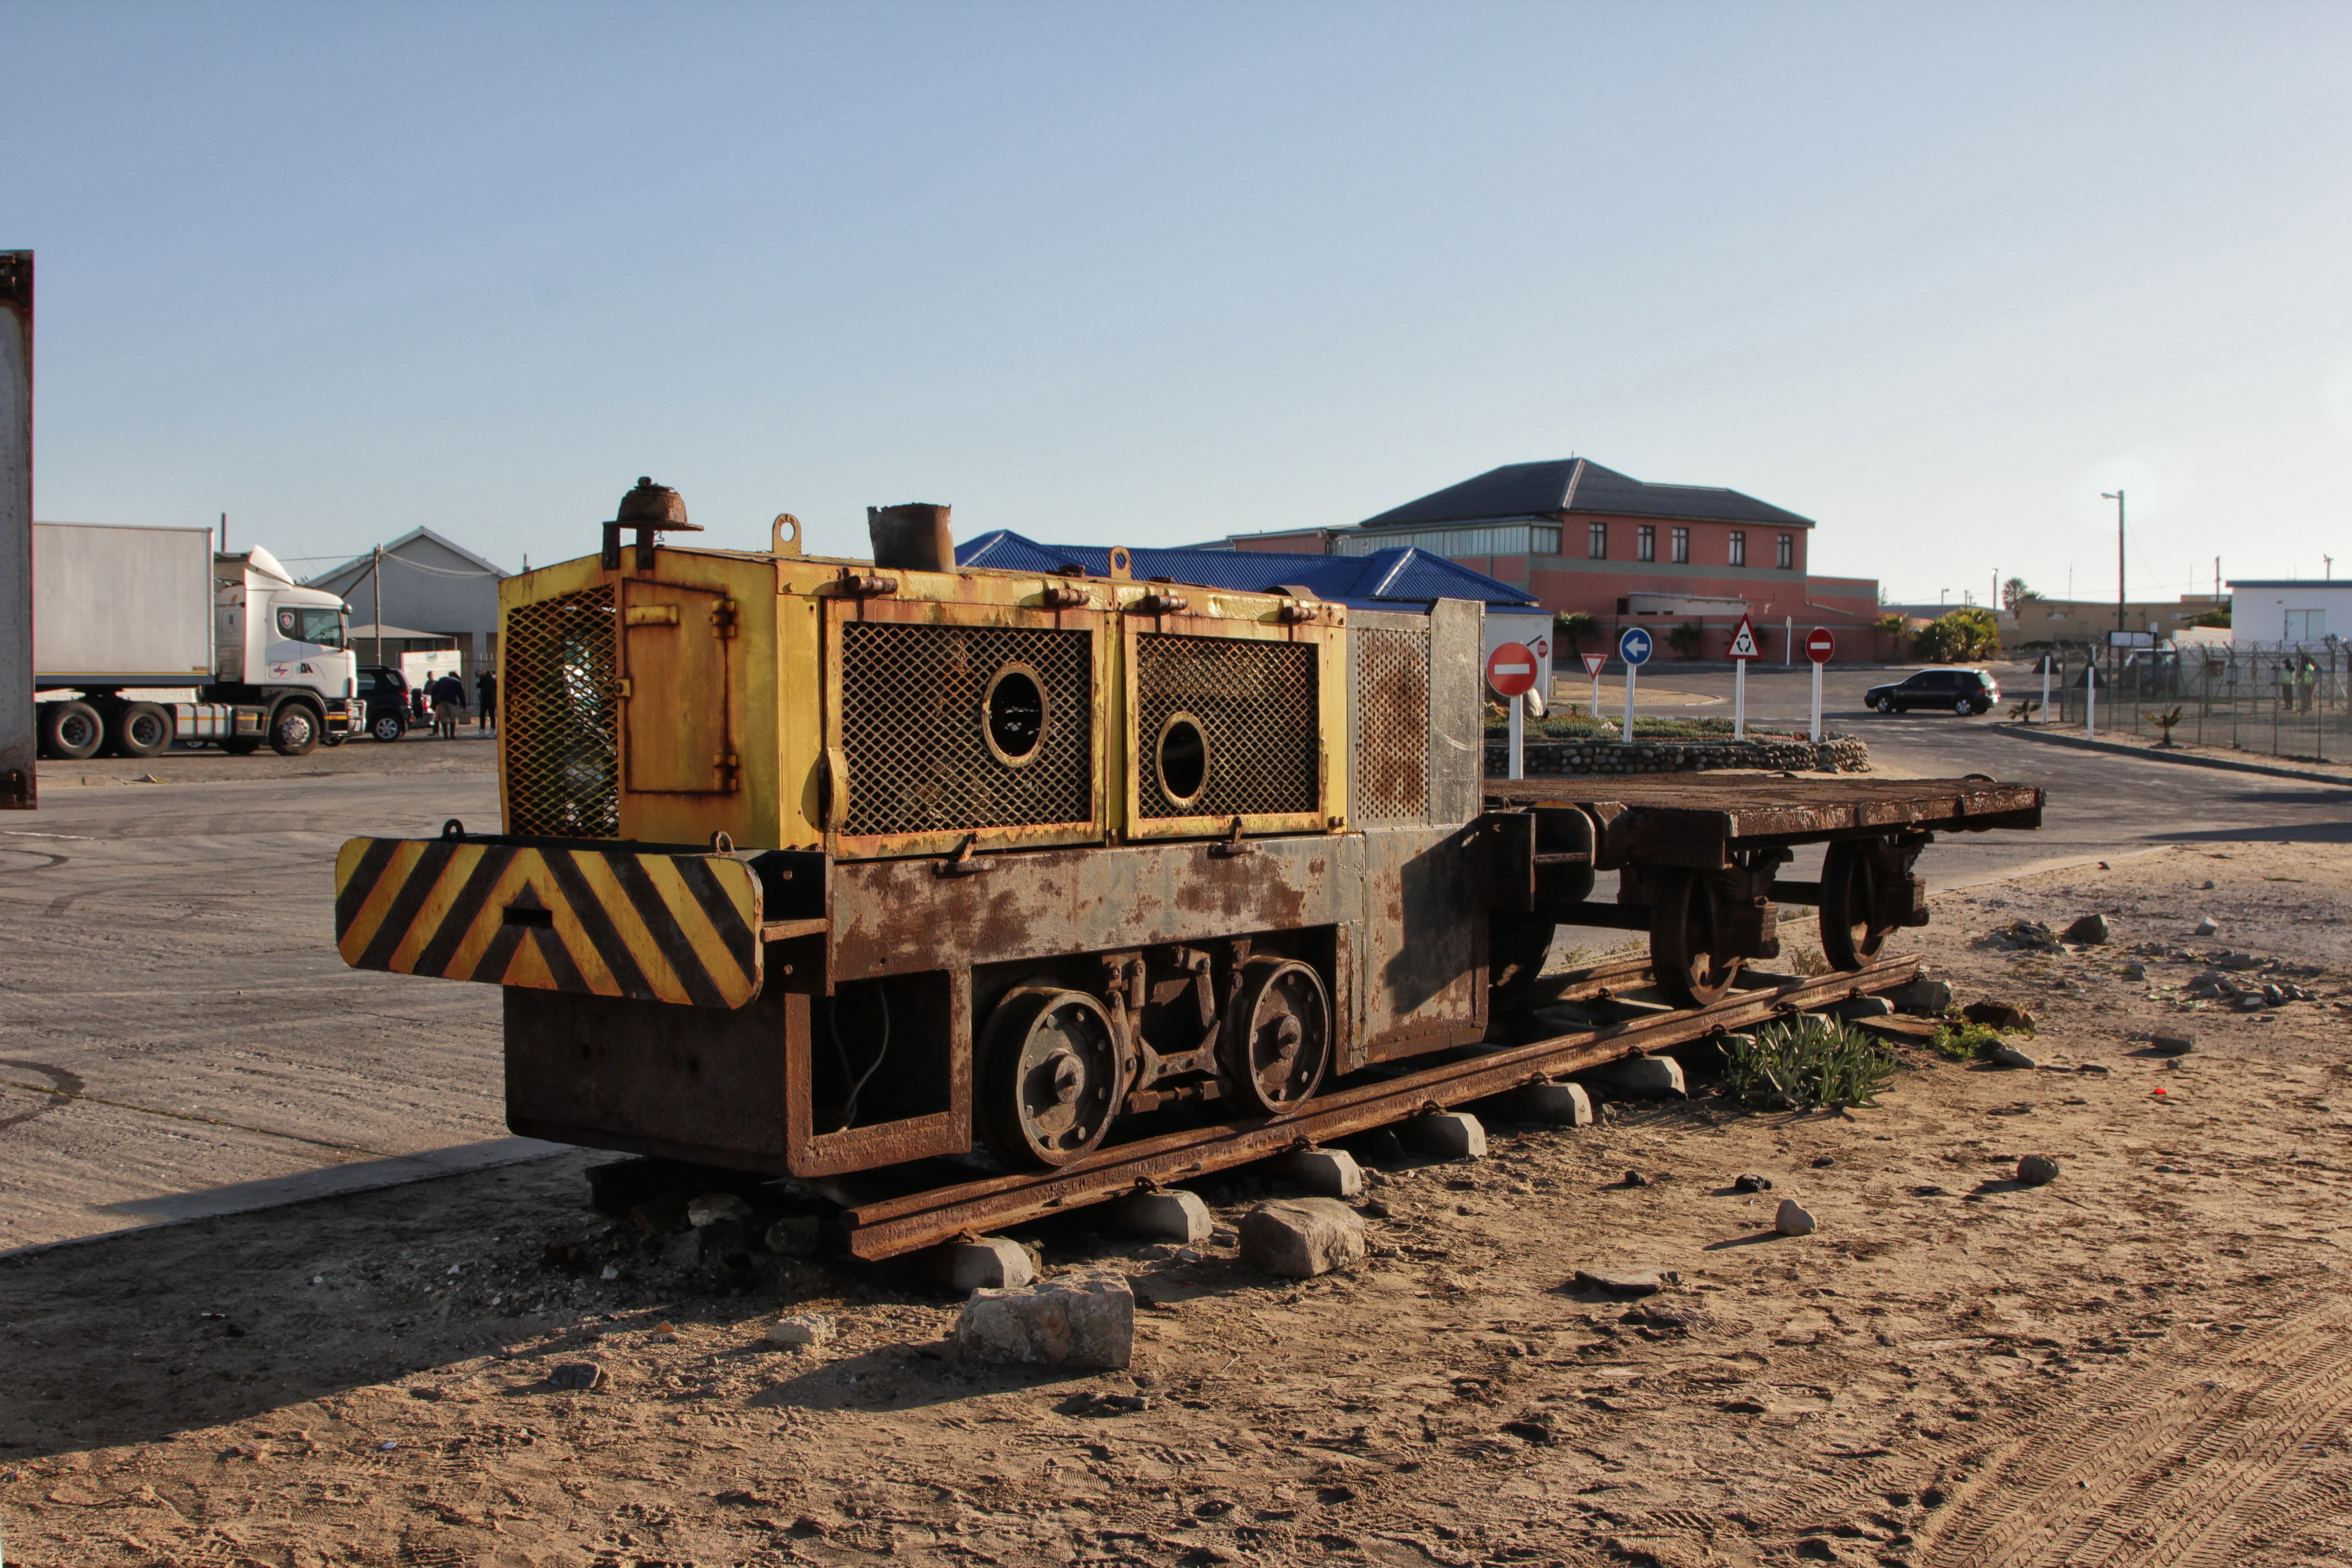 Part of the historic copper train that ran on narrow gauge tracks between Port Nolloth and Okiep.